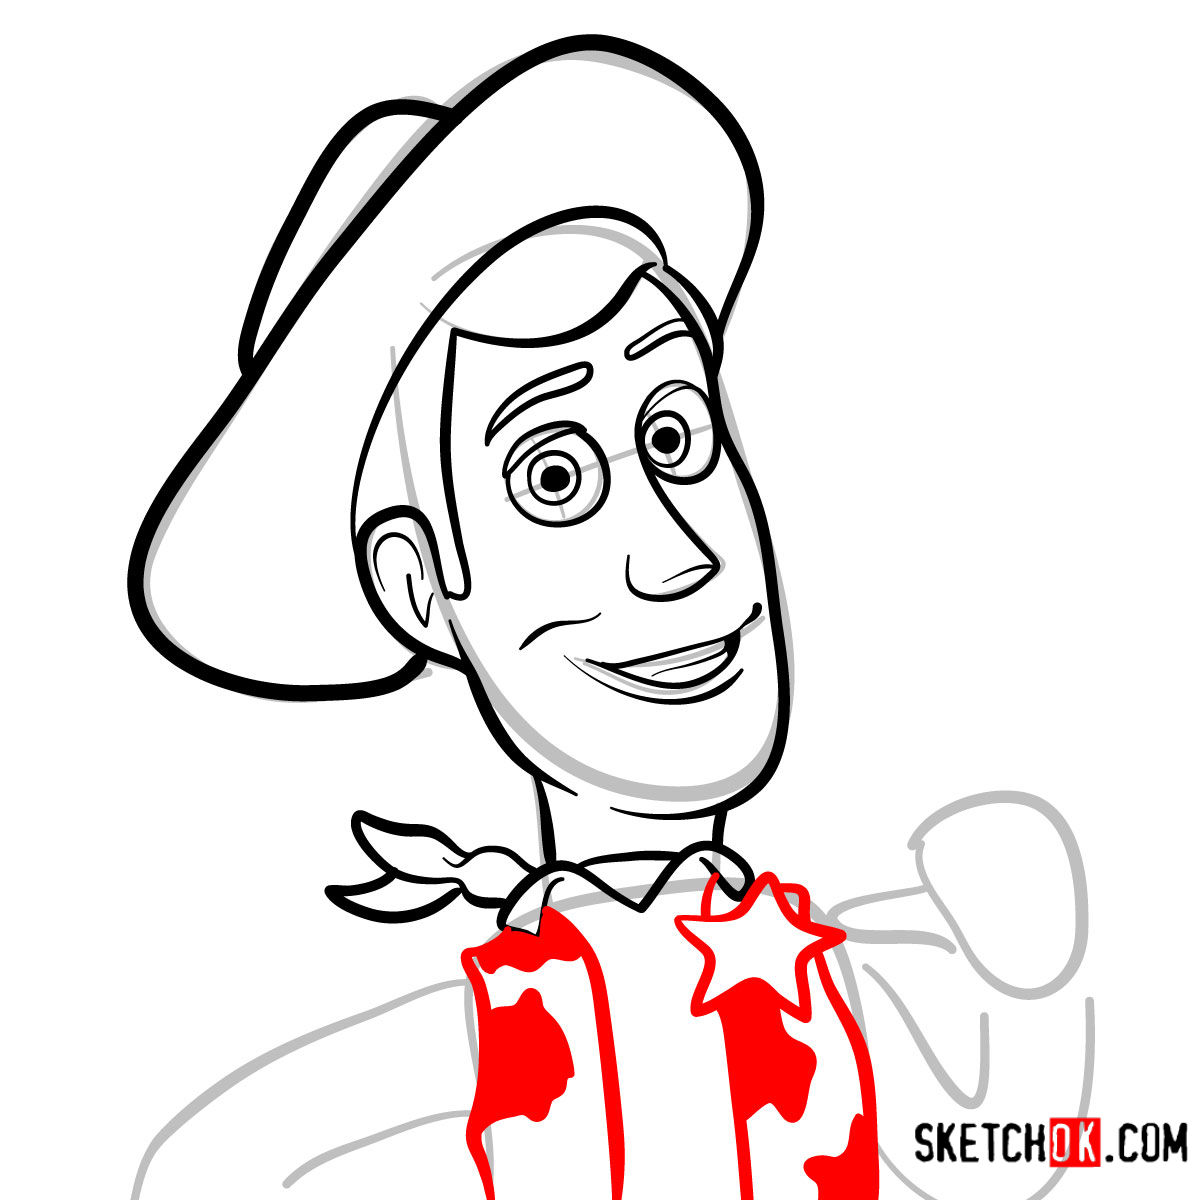 How to draw Woody's face | Toy Story - step 07